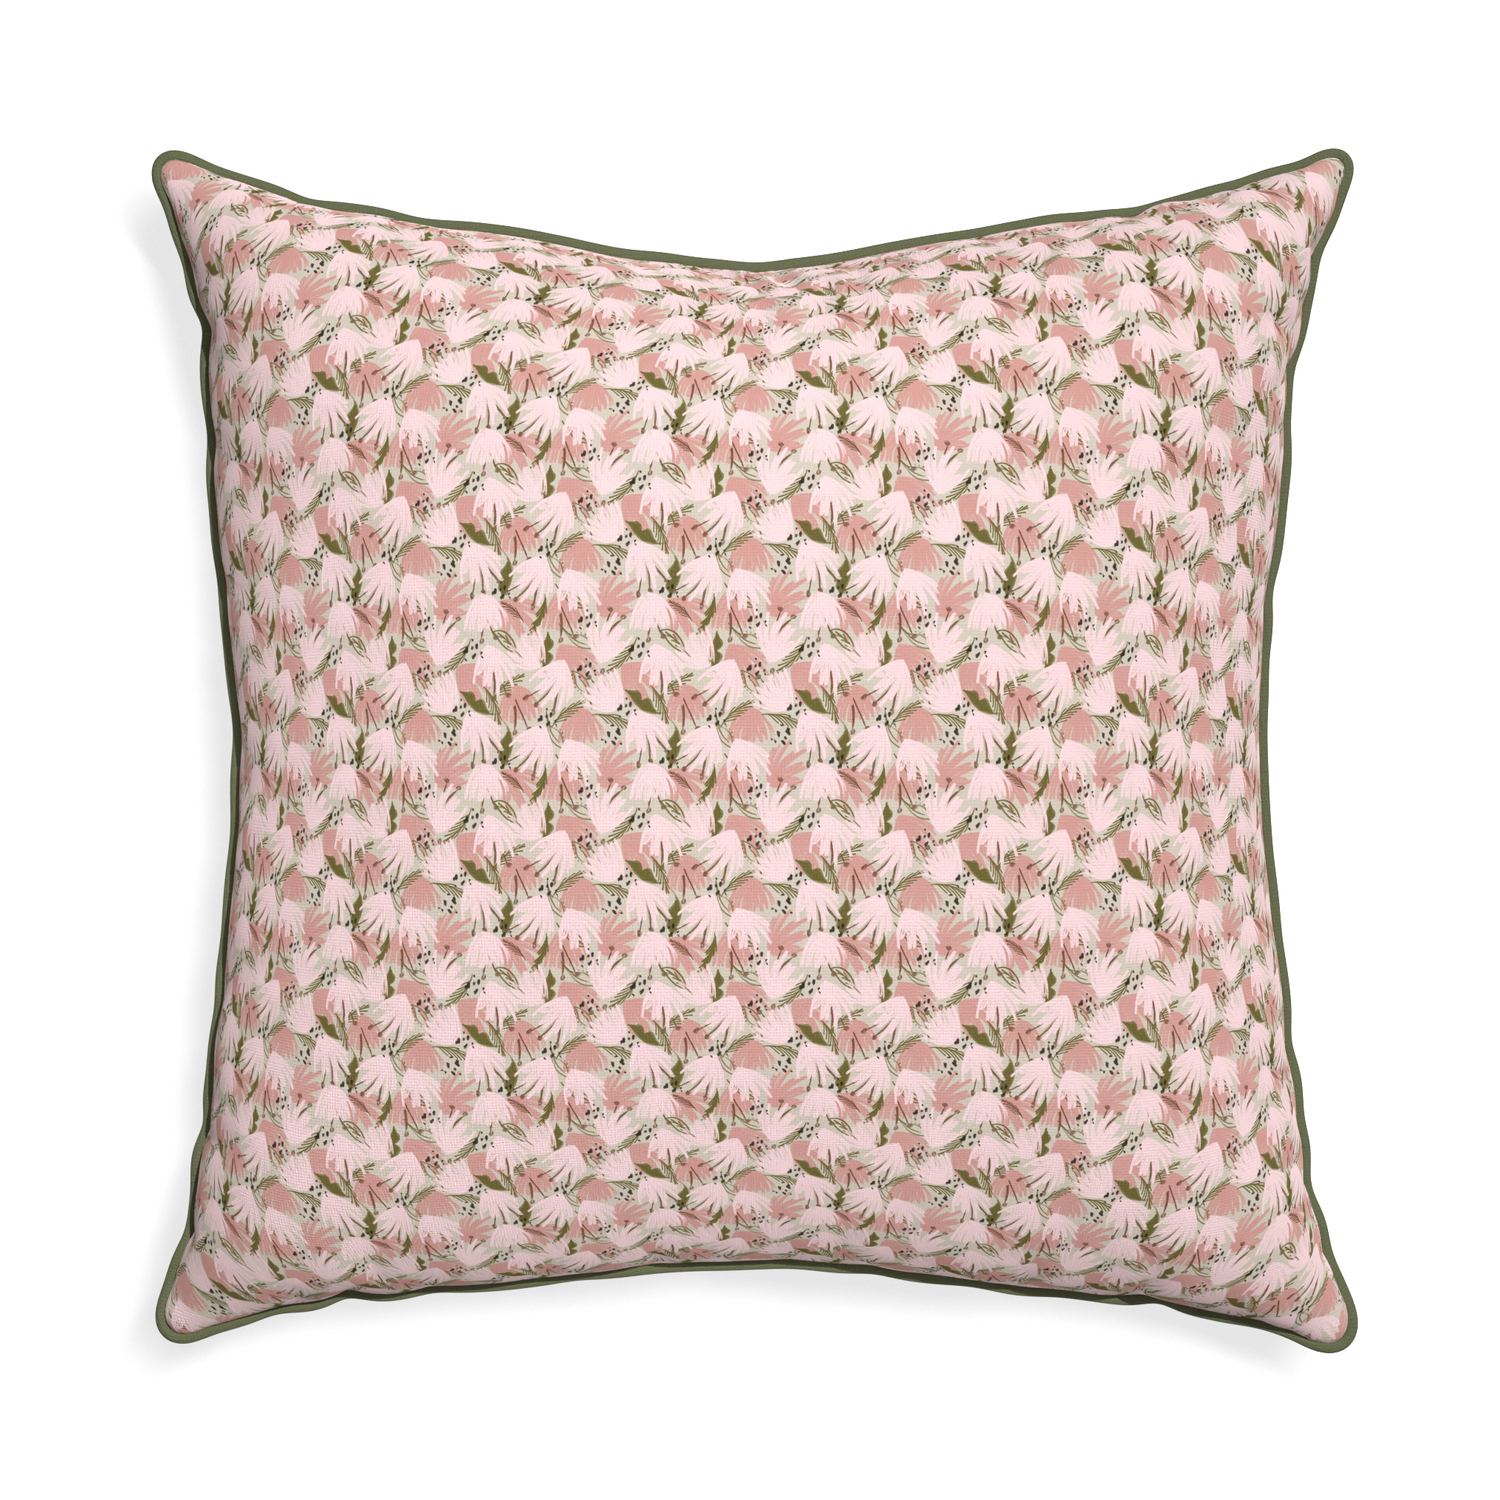 Euro-sham eden pink custom pink floralpillow with f piping on white background